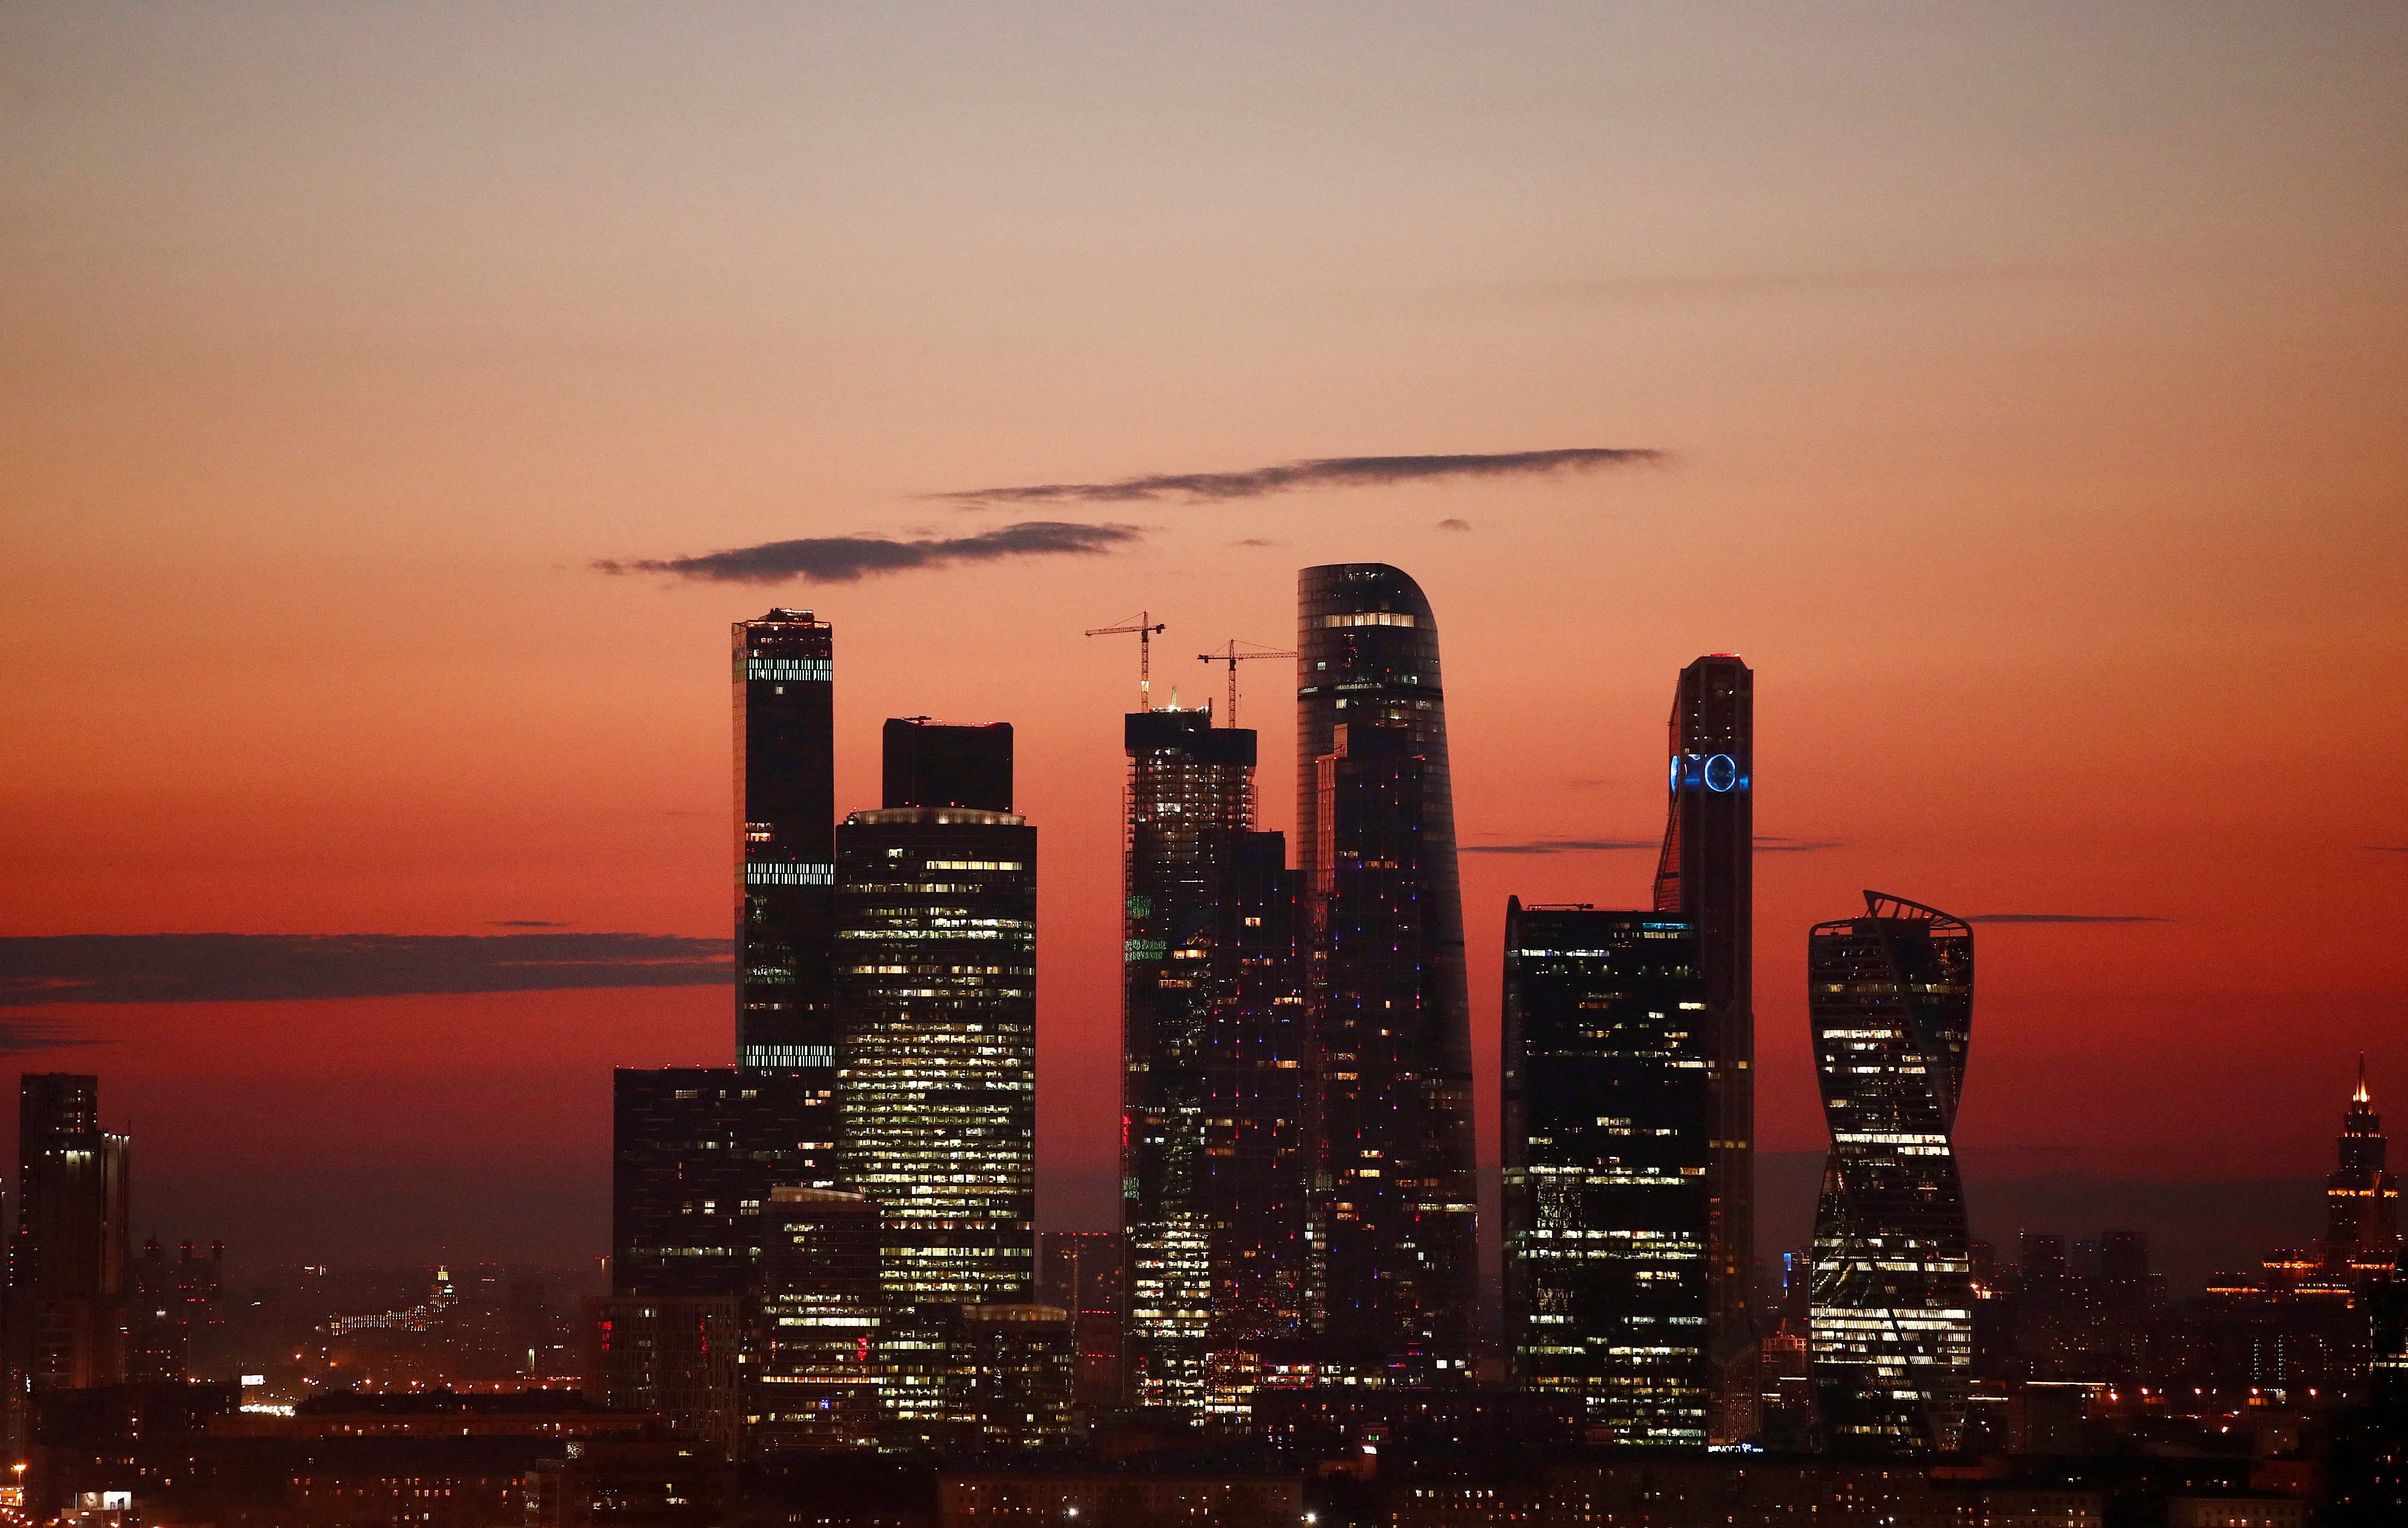 The skyscrapers of the Moscow International Business Centre, also known as 